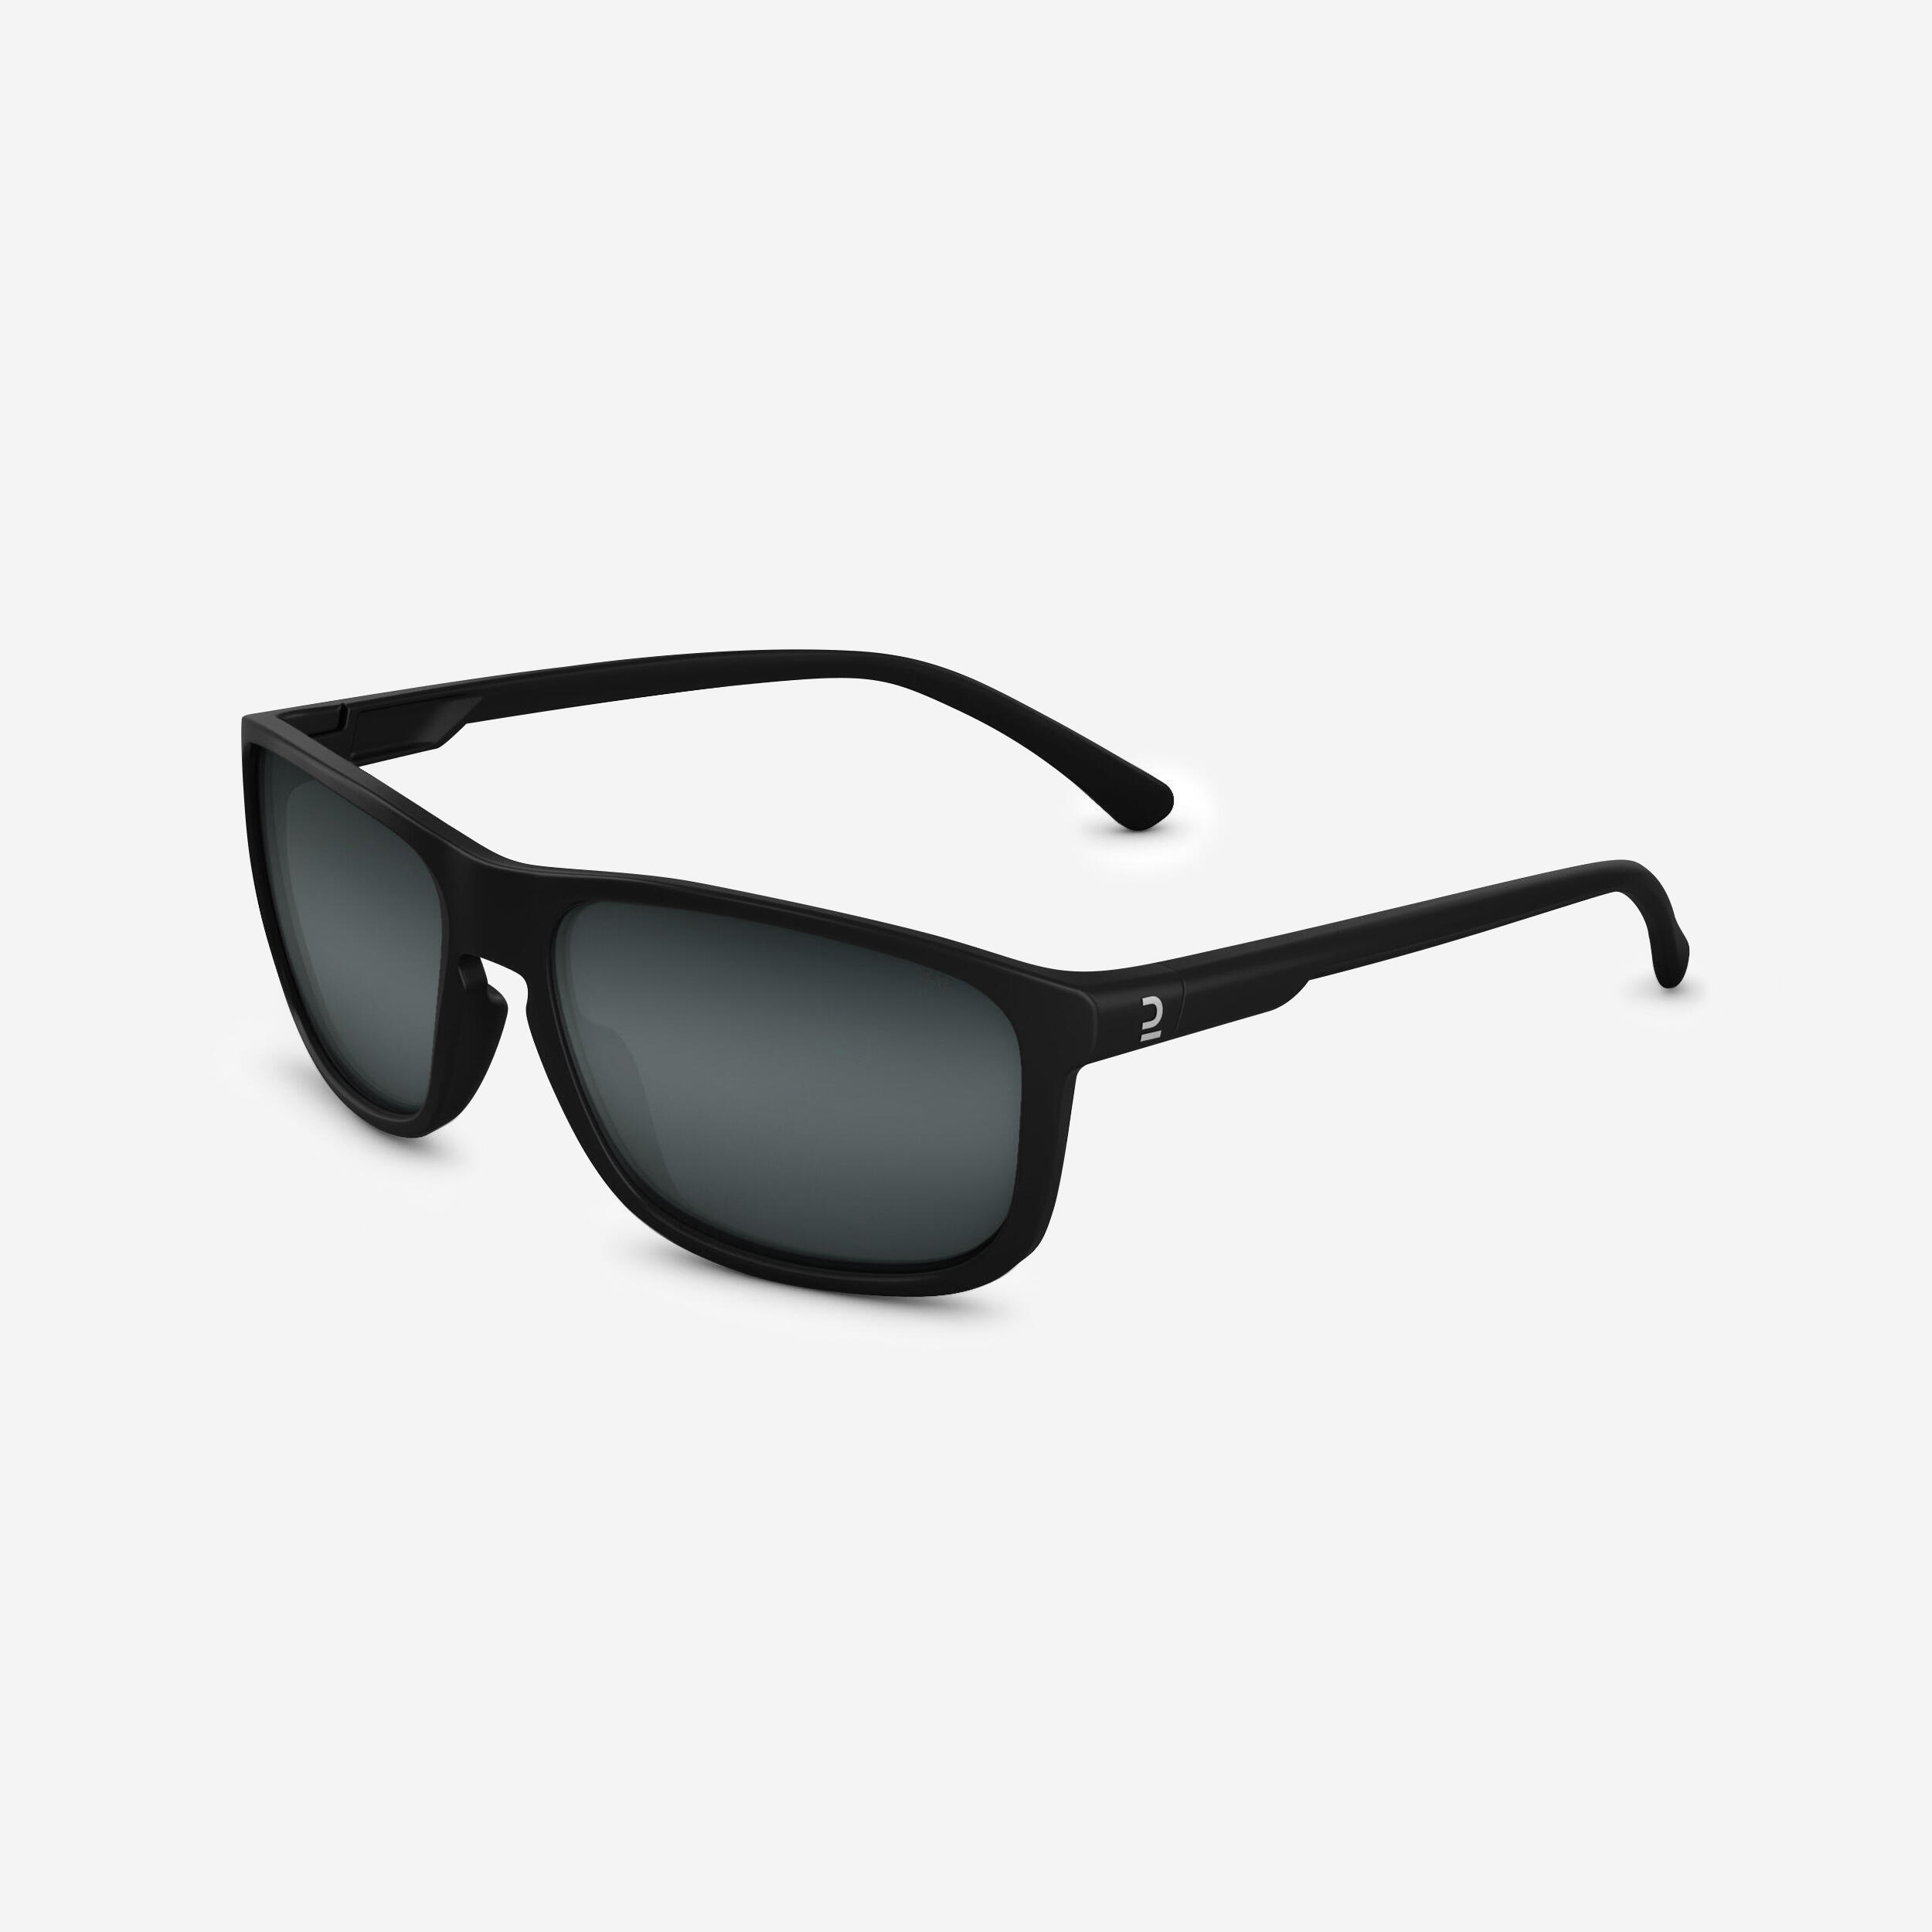 Quechua Adult Hiking Sunglasses MH100 Category 3 - One Size